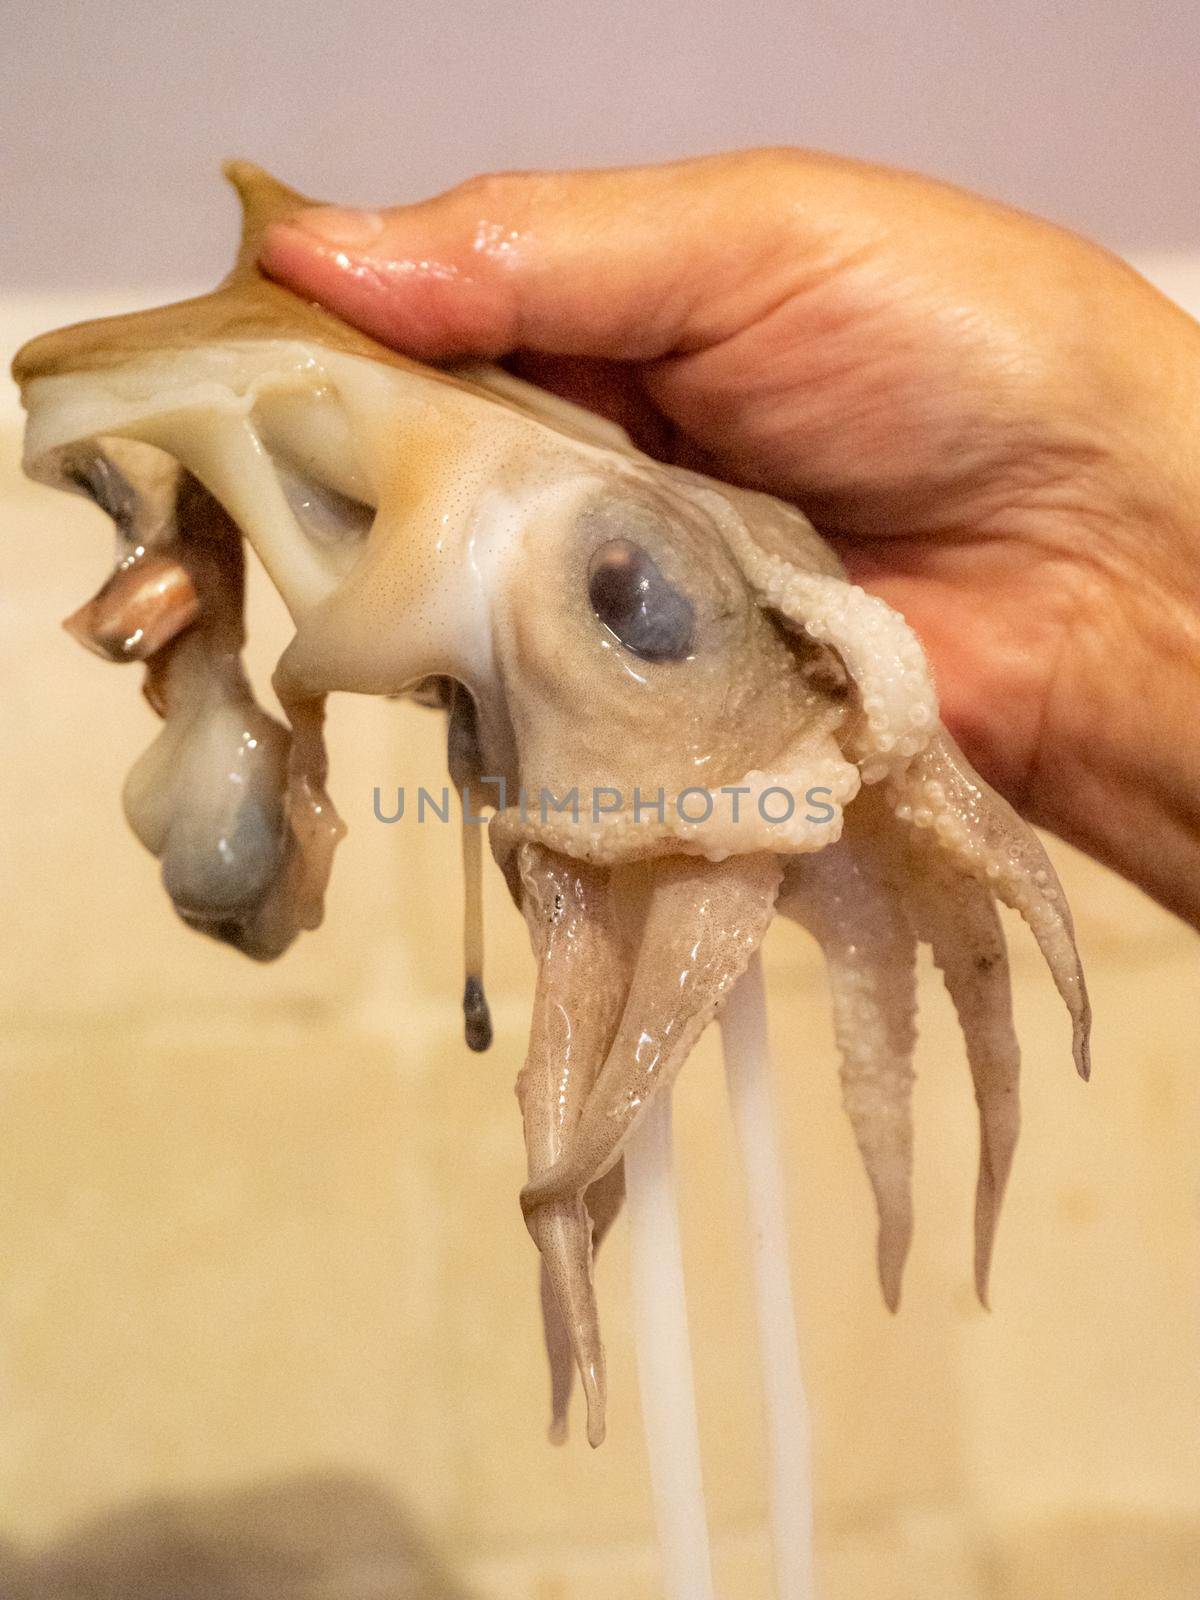 cleaning a raw adriatic cuttlefish at home in Numana, Marche, Italy